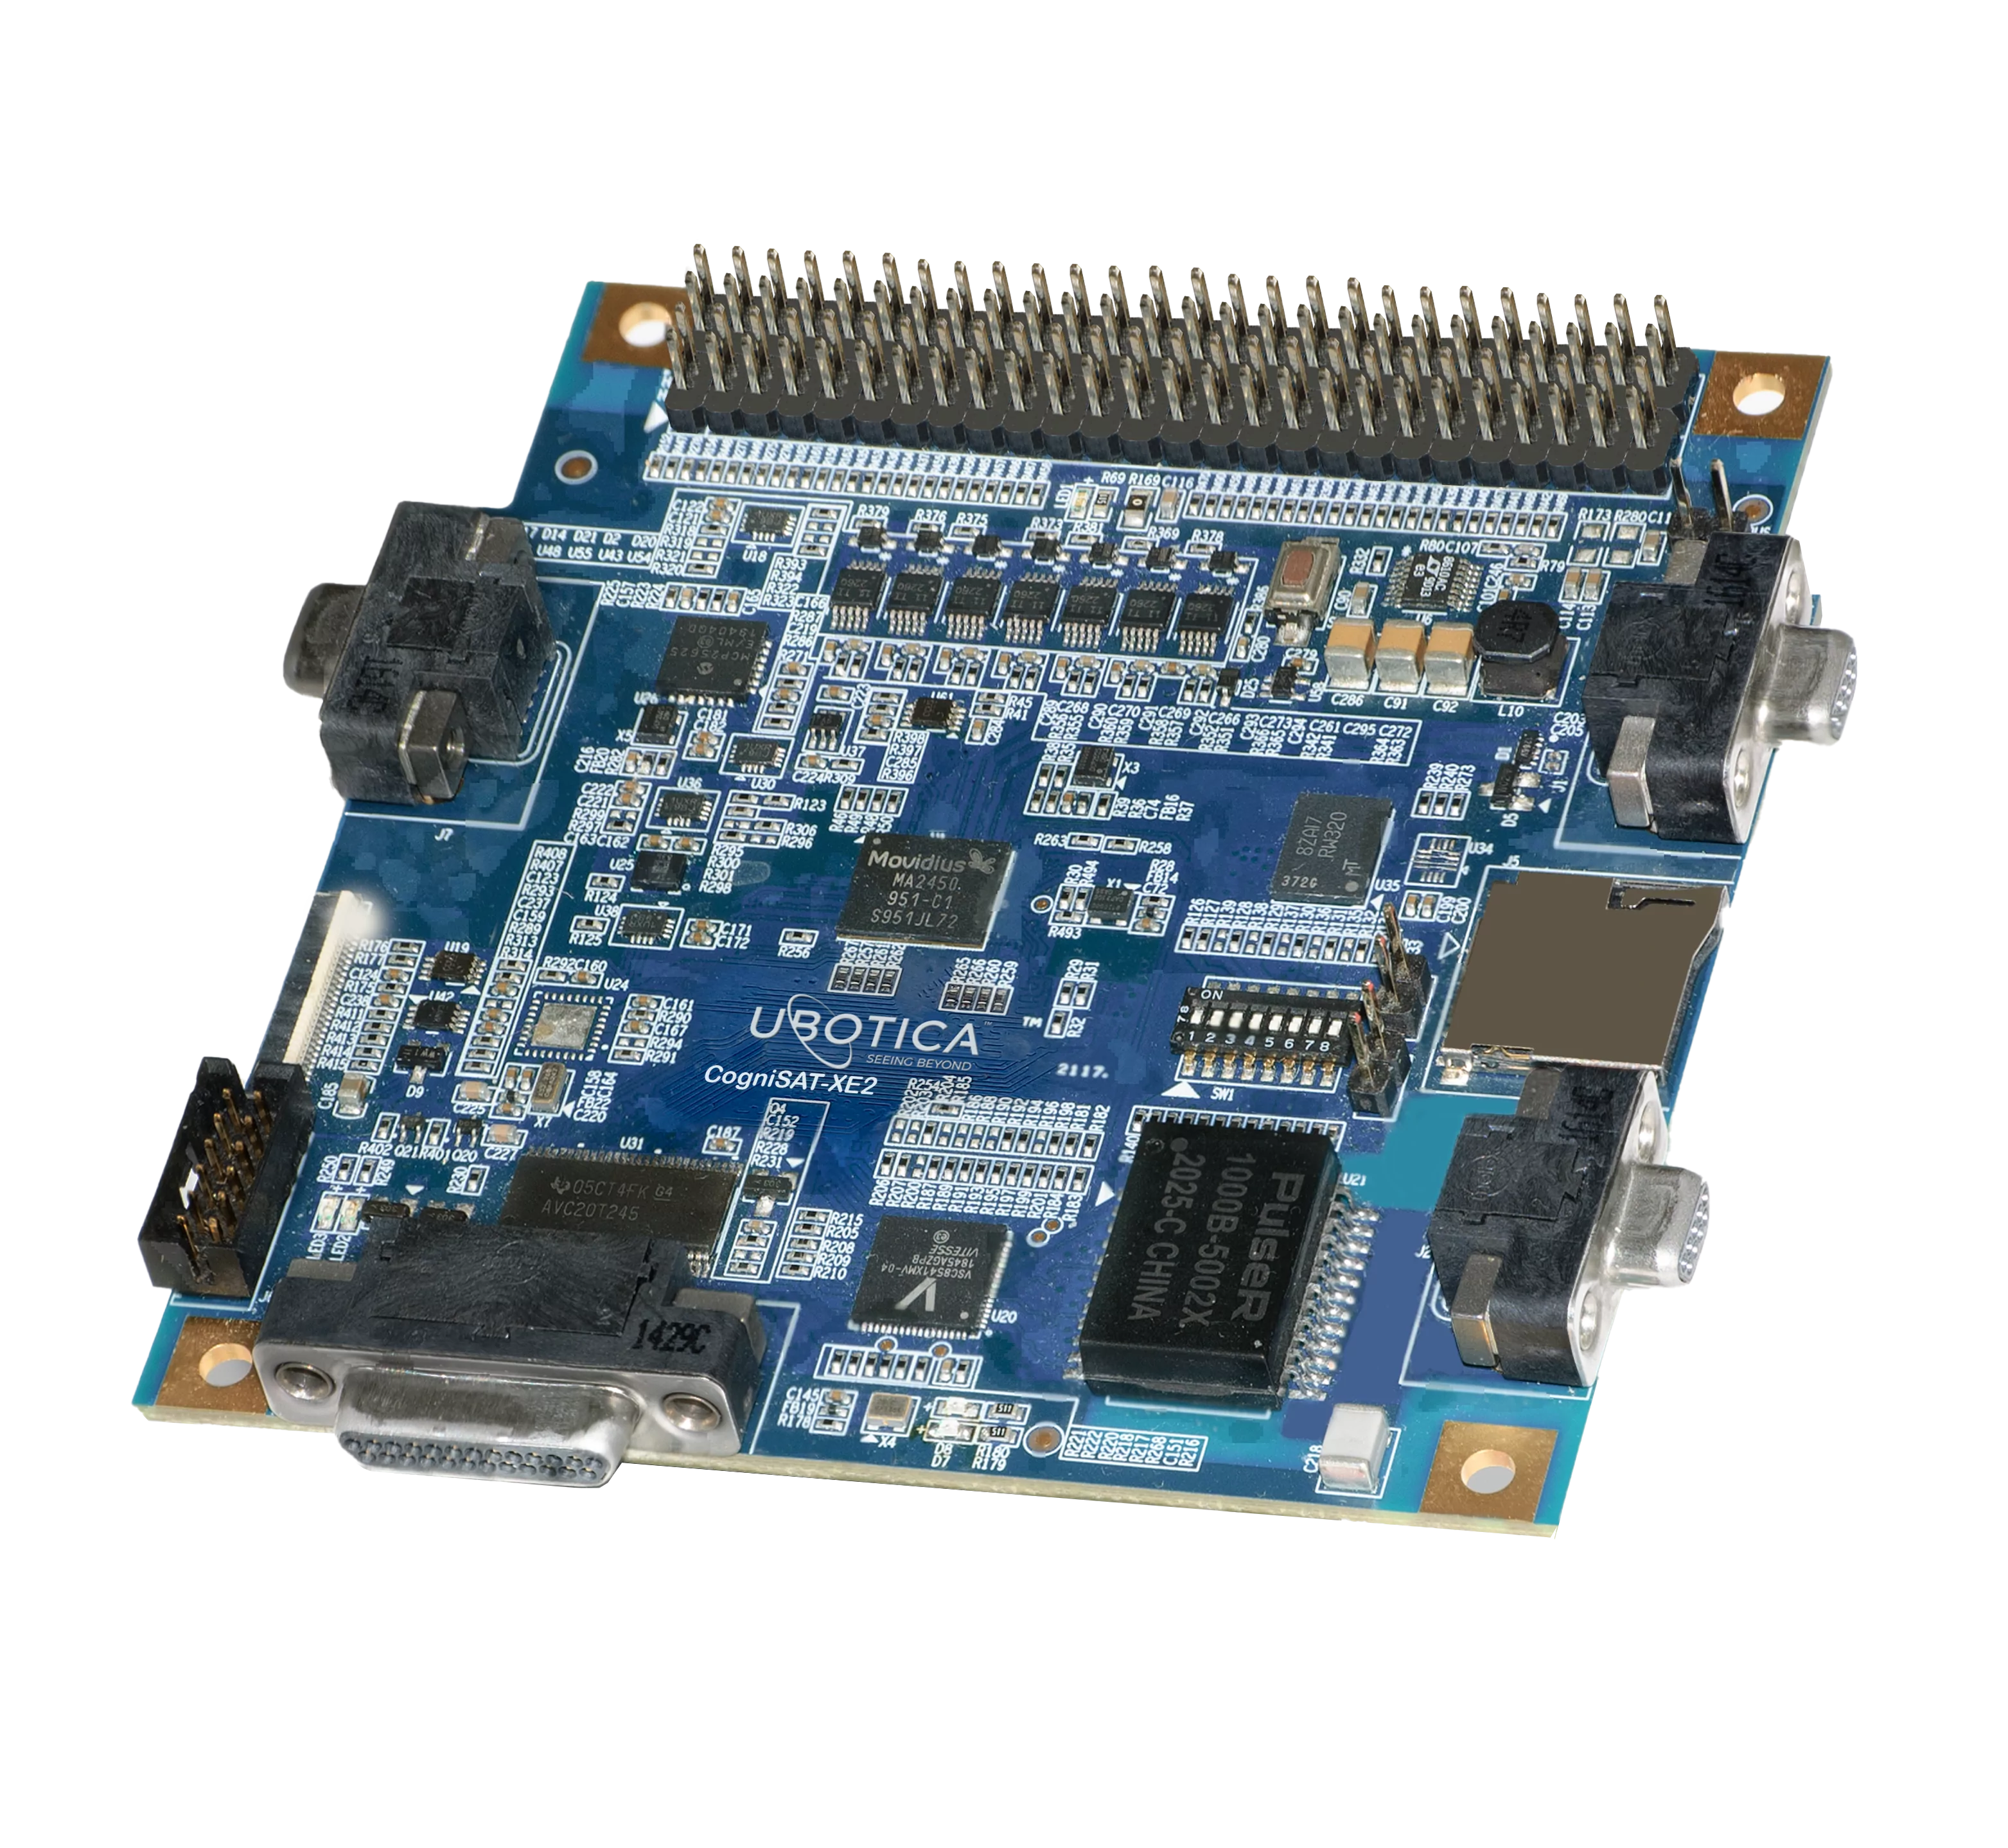 Ubotica’s CogniSAT-XE2 board provides high performance Space AI capability to cube and small satellites in a compact, low power platform.